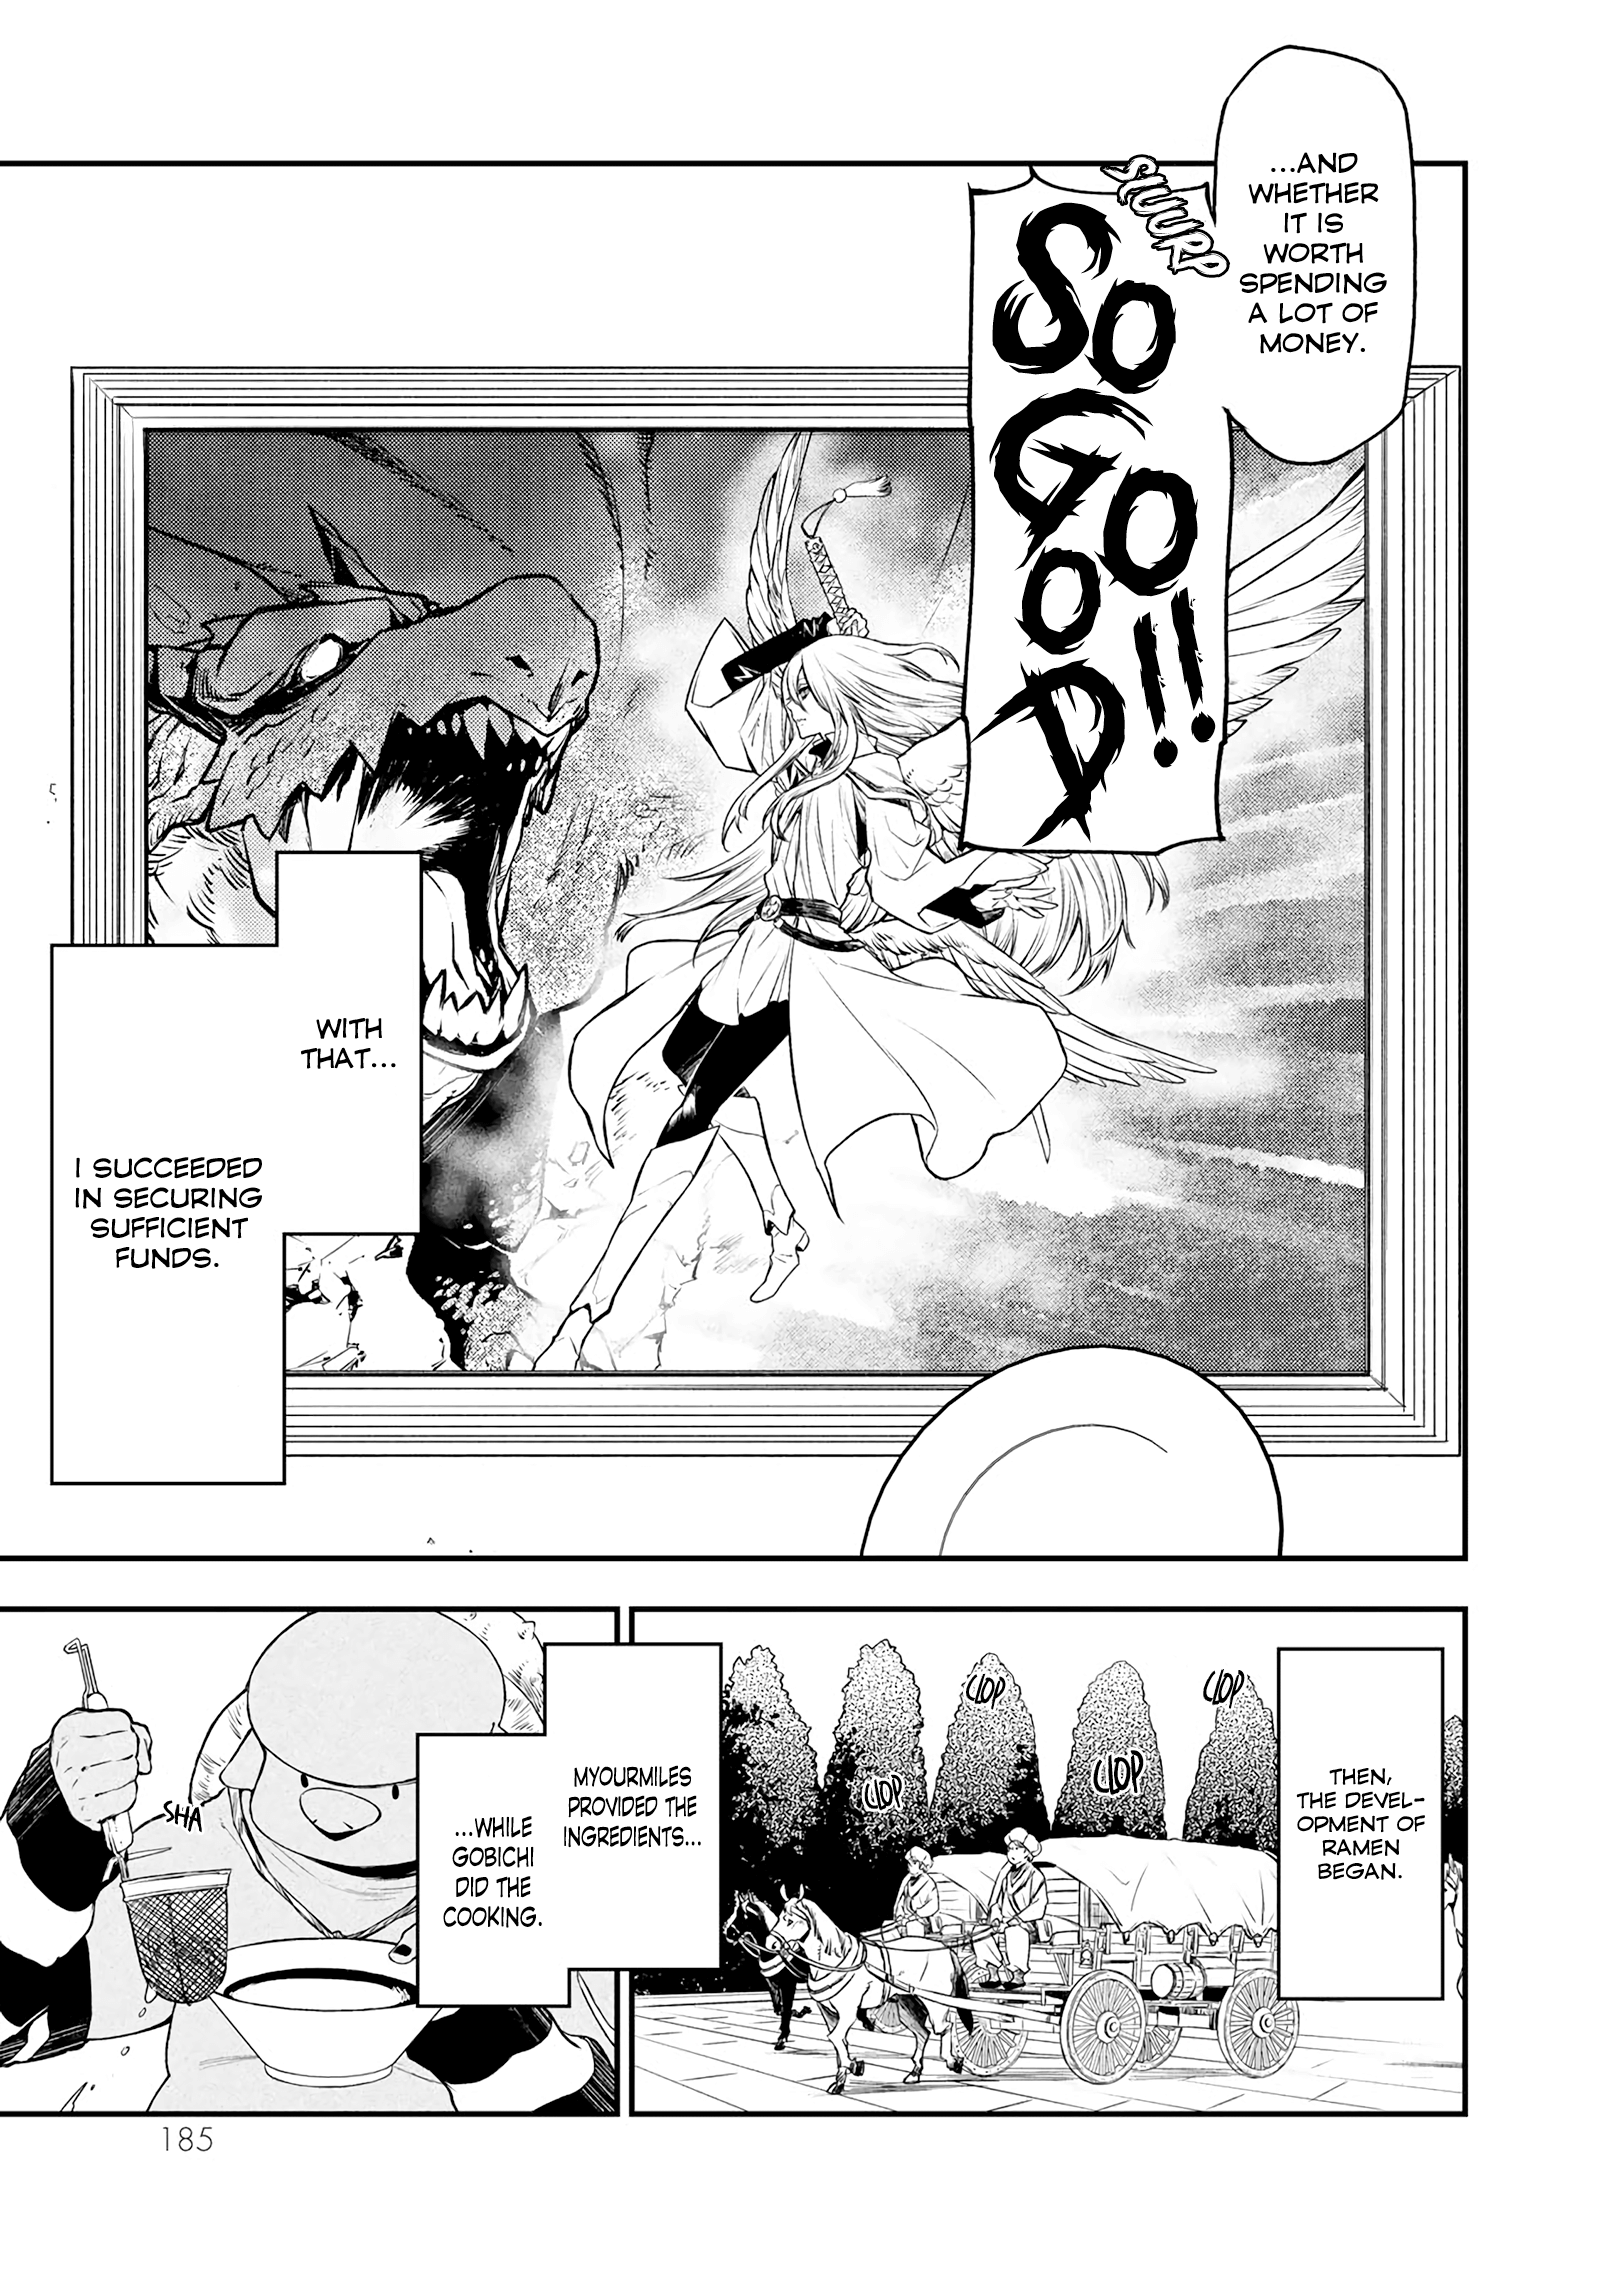 That Time I Got Reincarnated as a Slime, That Time I Got Reincarnated as a Slime manga